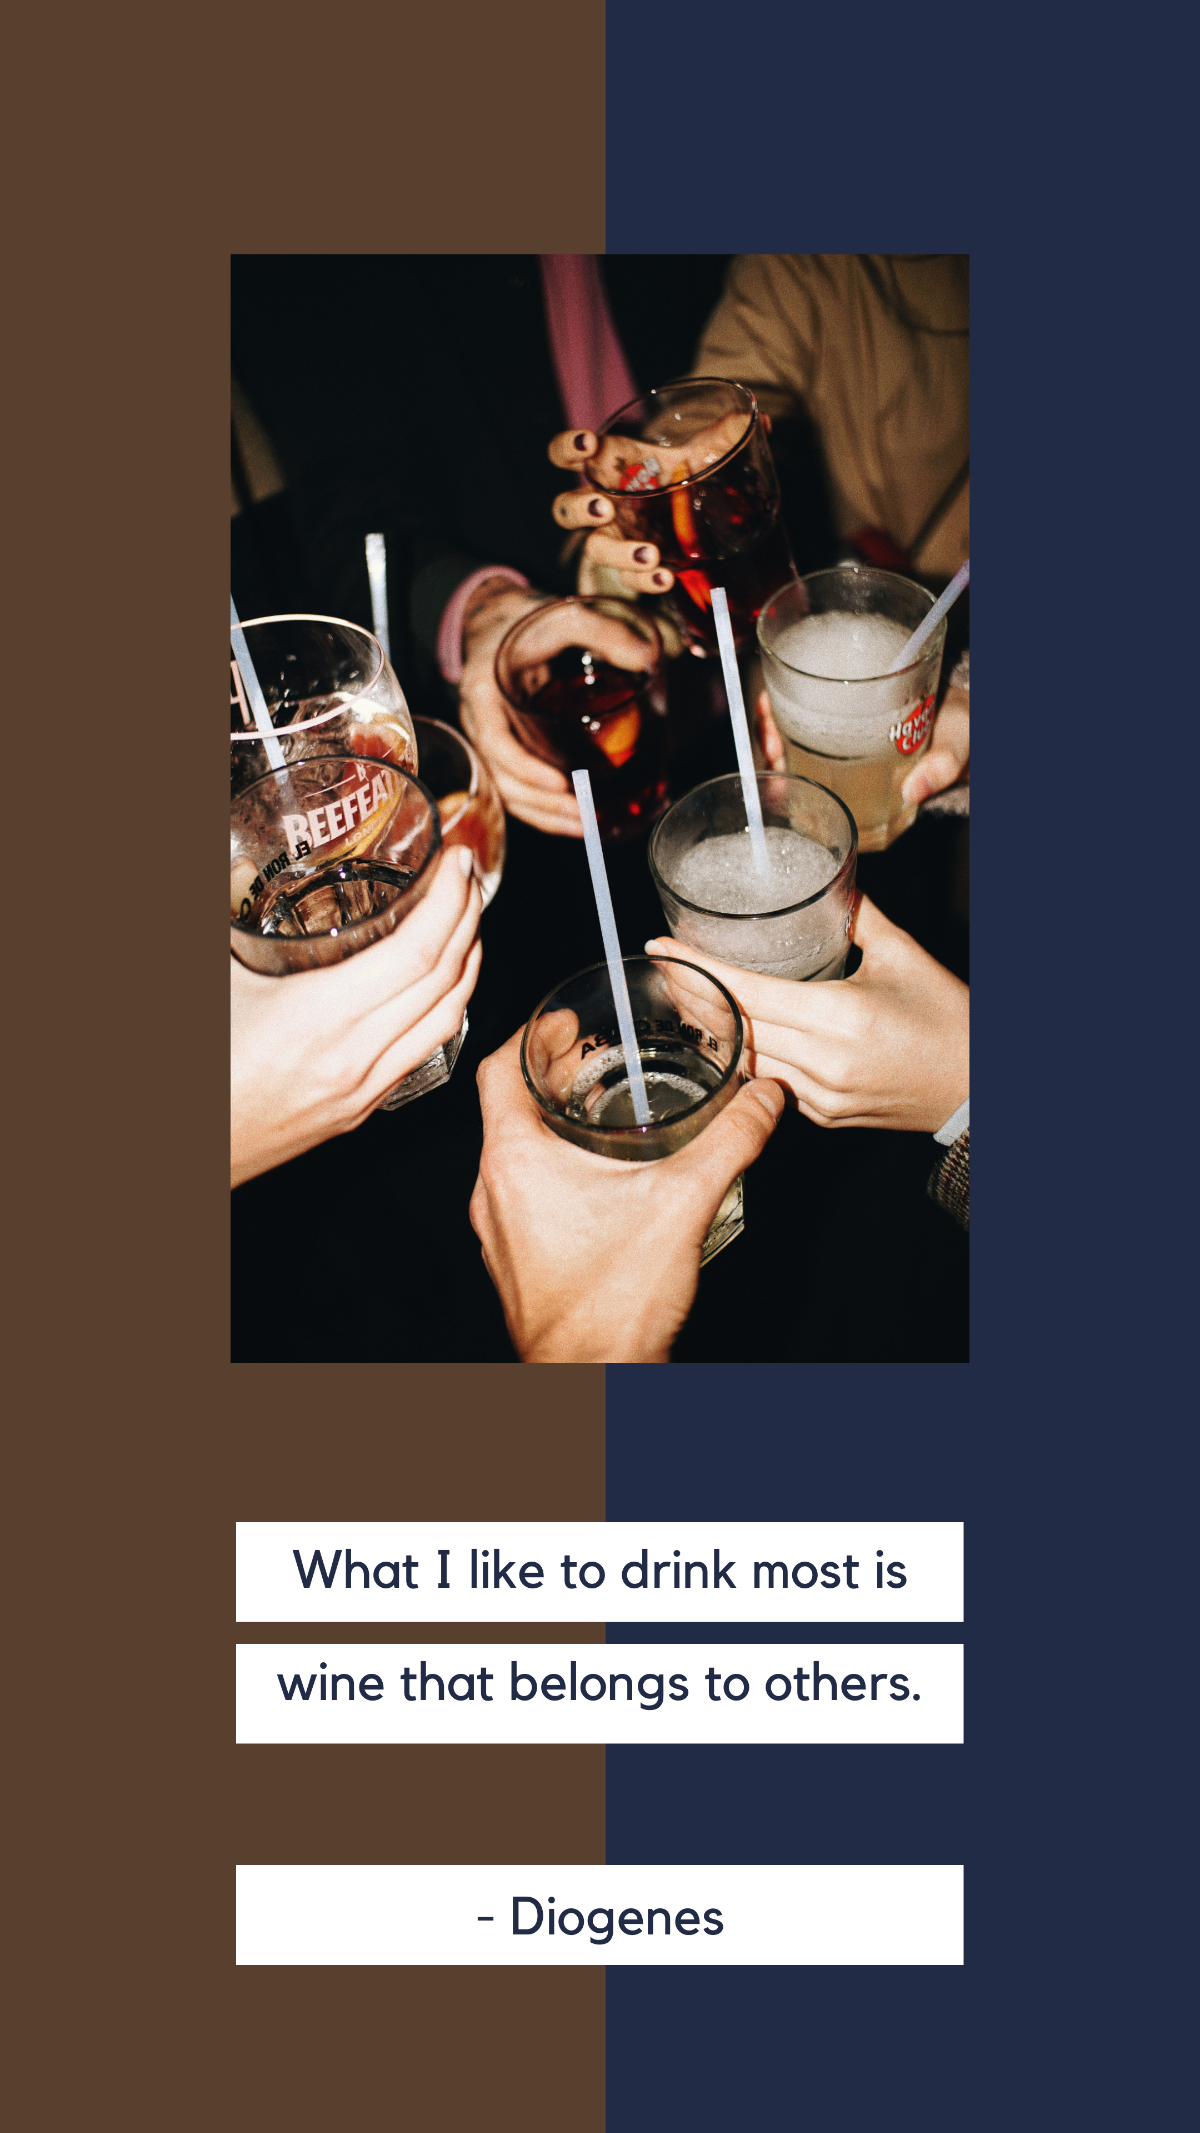 What I like to drink most is wine that belongs to others. Template